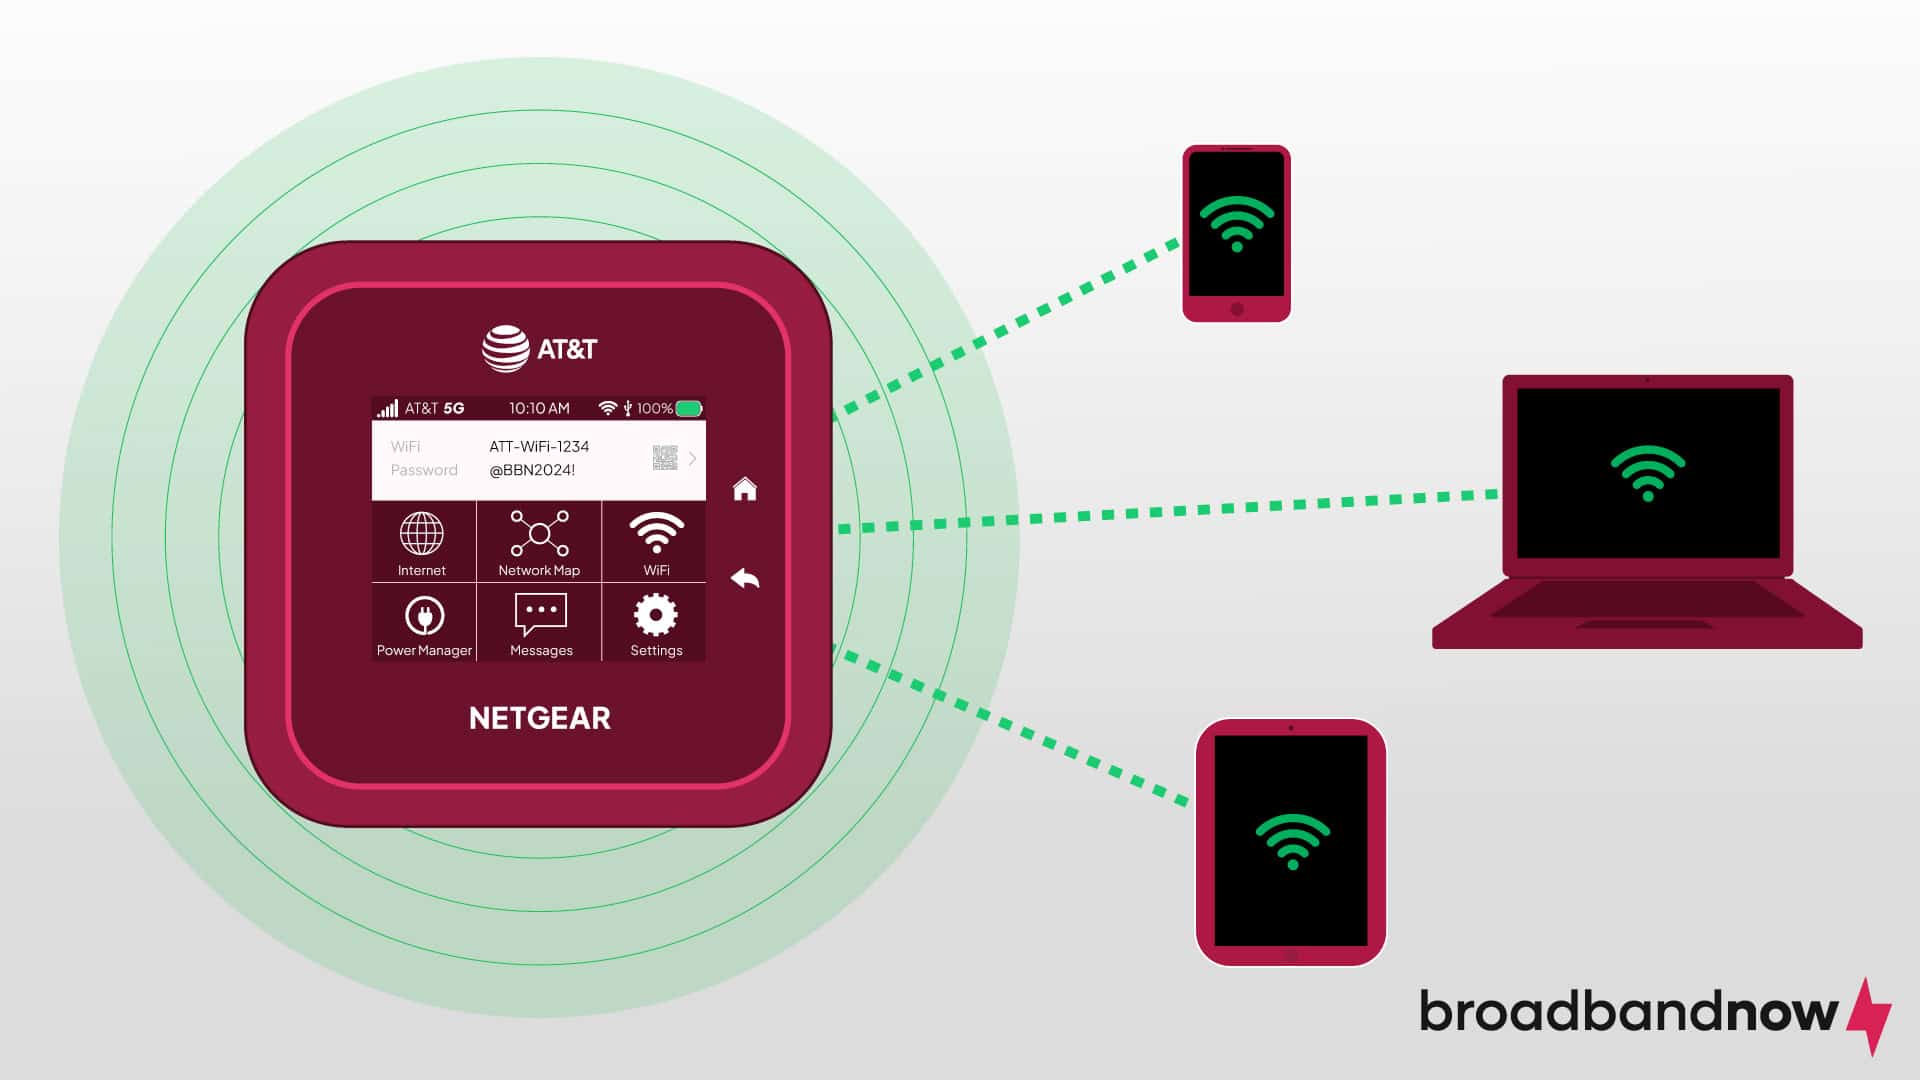 A graphic showing an AT&T Netgear hotspot device connecting to a smartphone, laptop, and tablet.